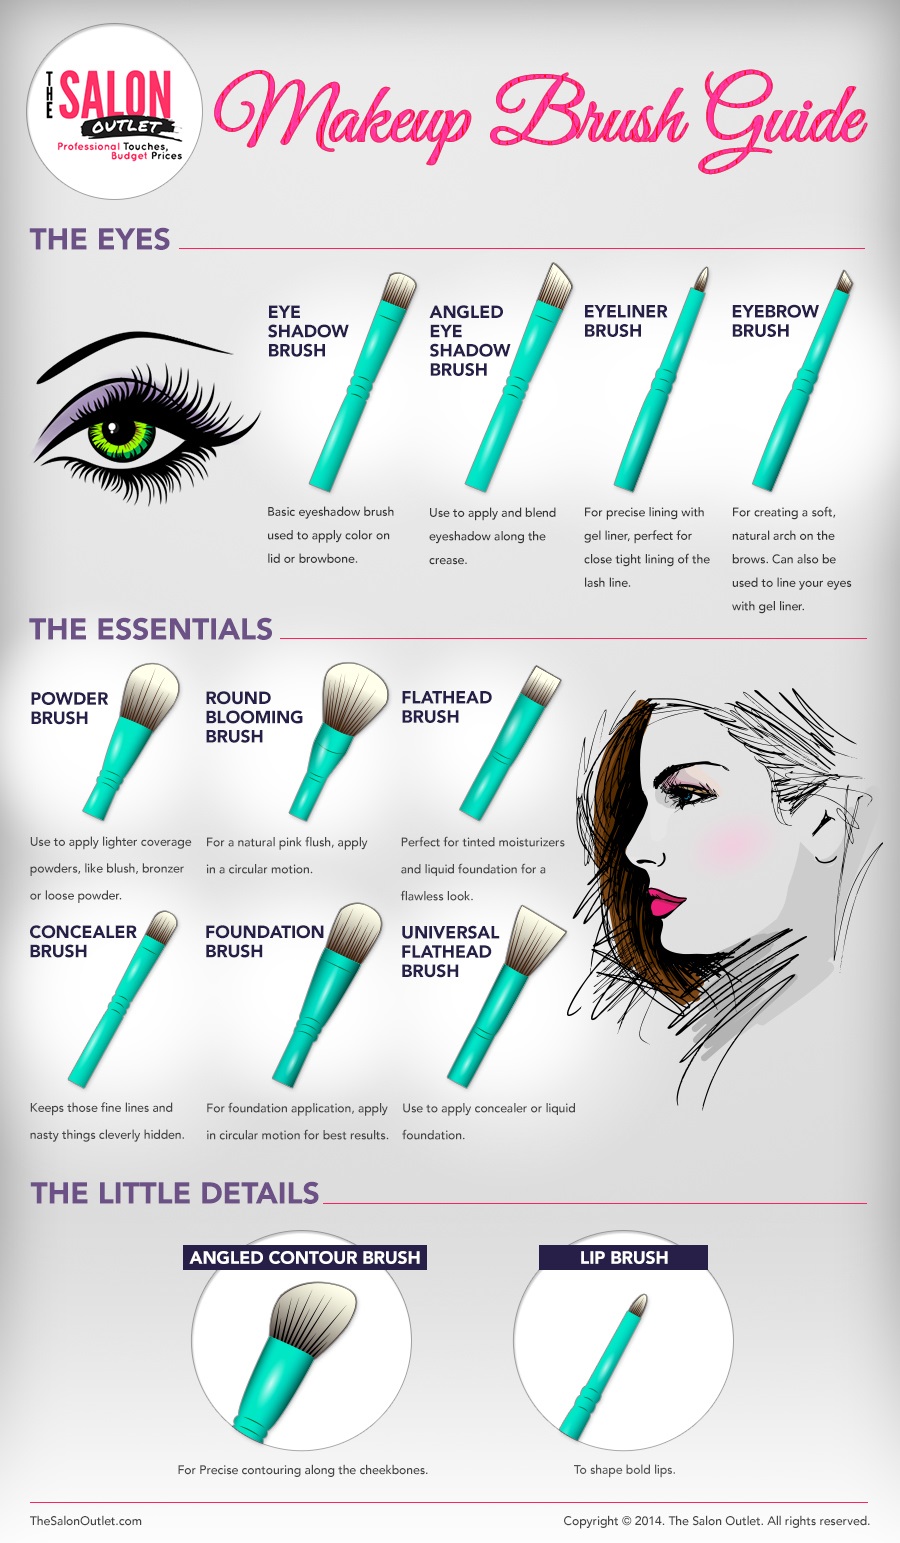 A guide to make-up brushes: Which ones to use and when 